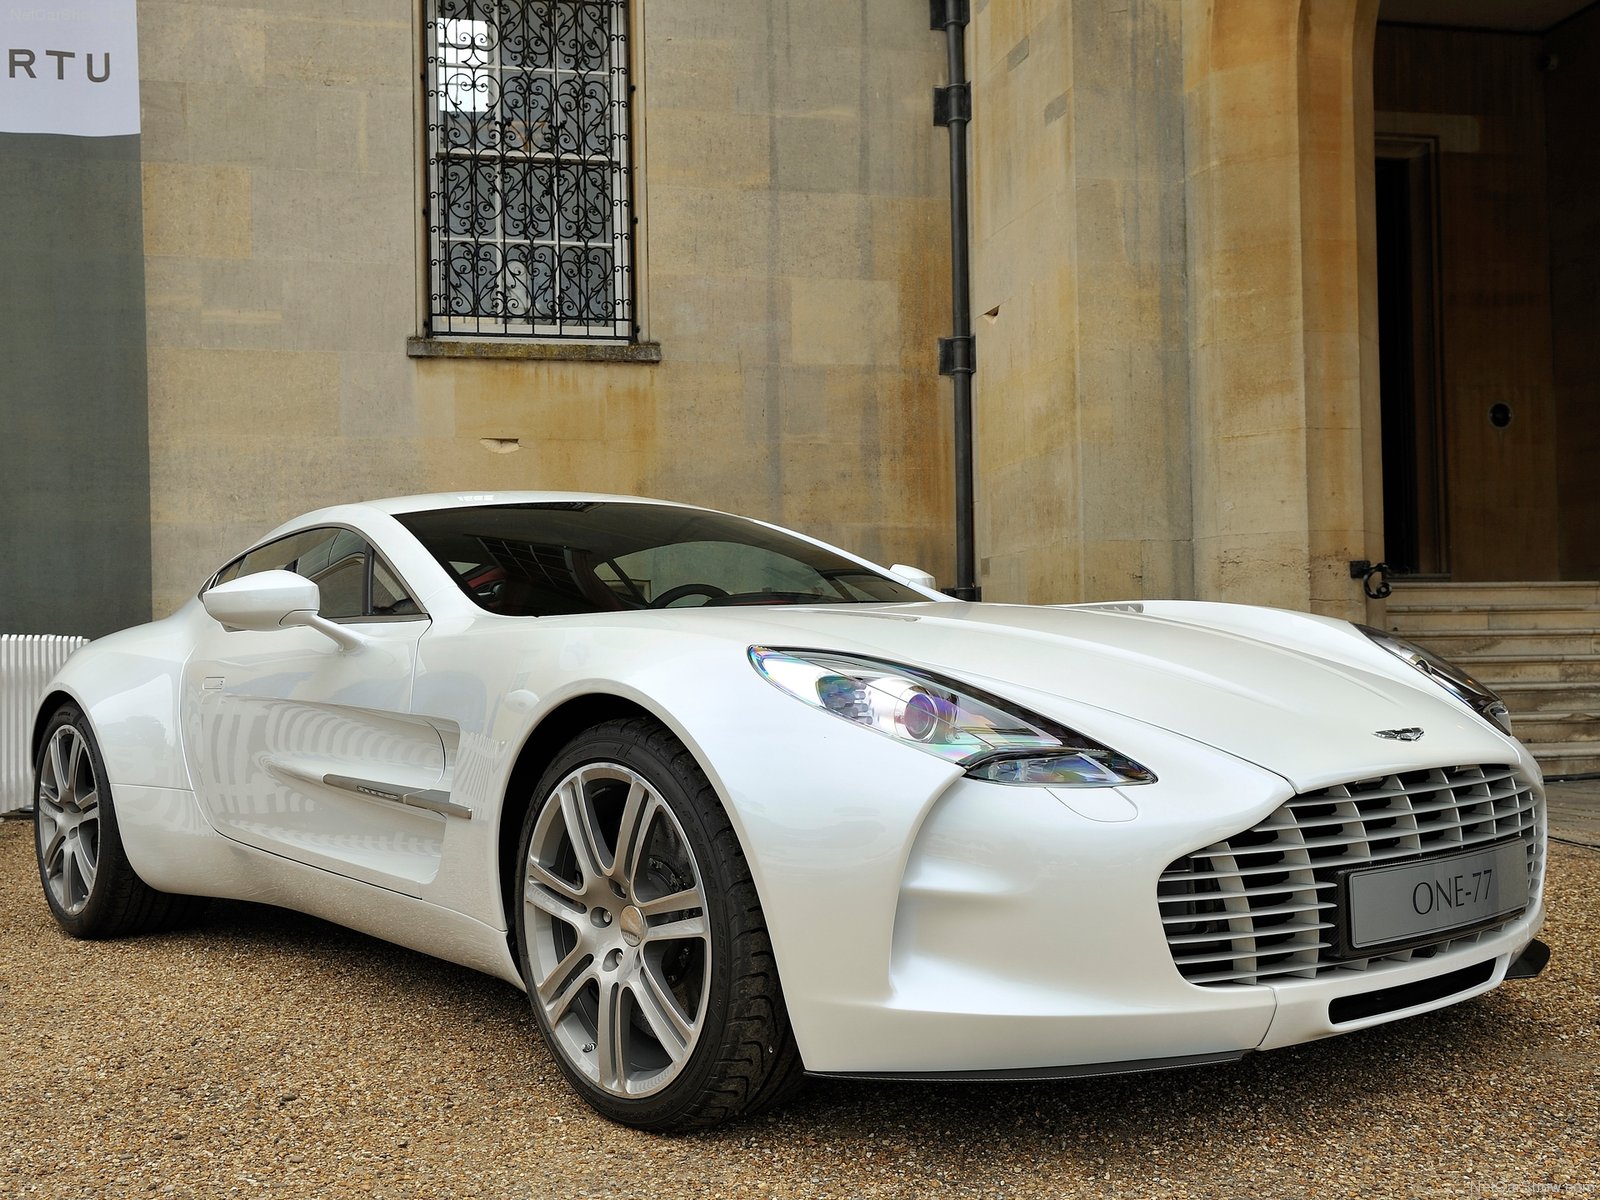 Wallpapers aston martin one-77 cars on the desktop